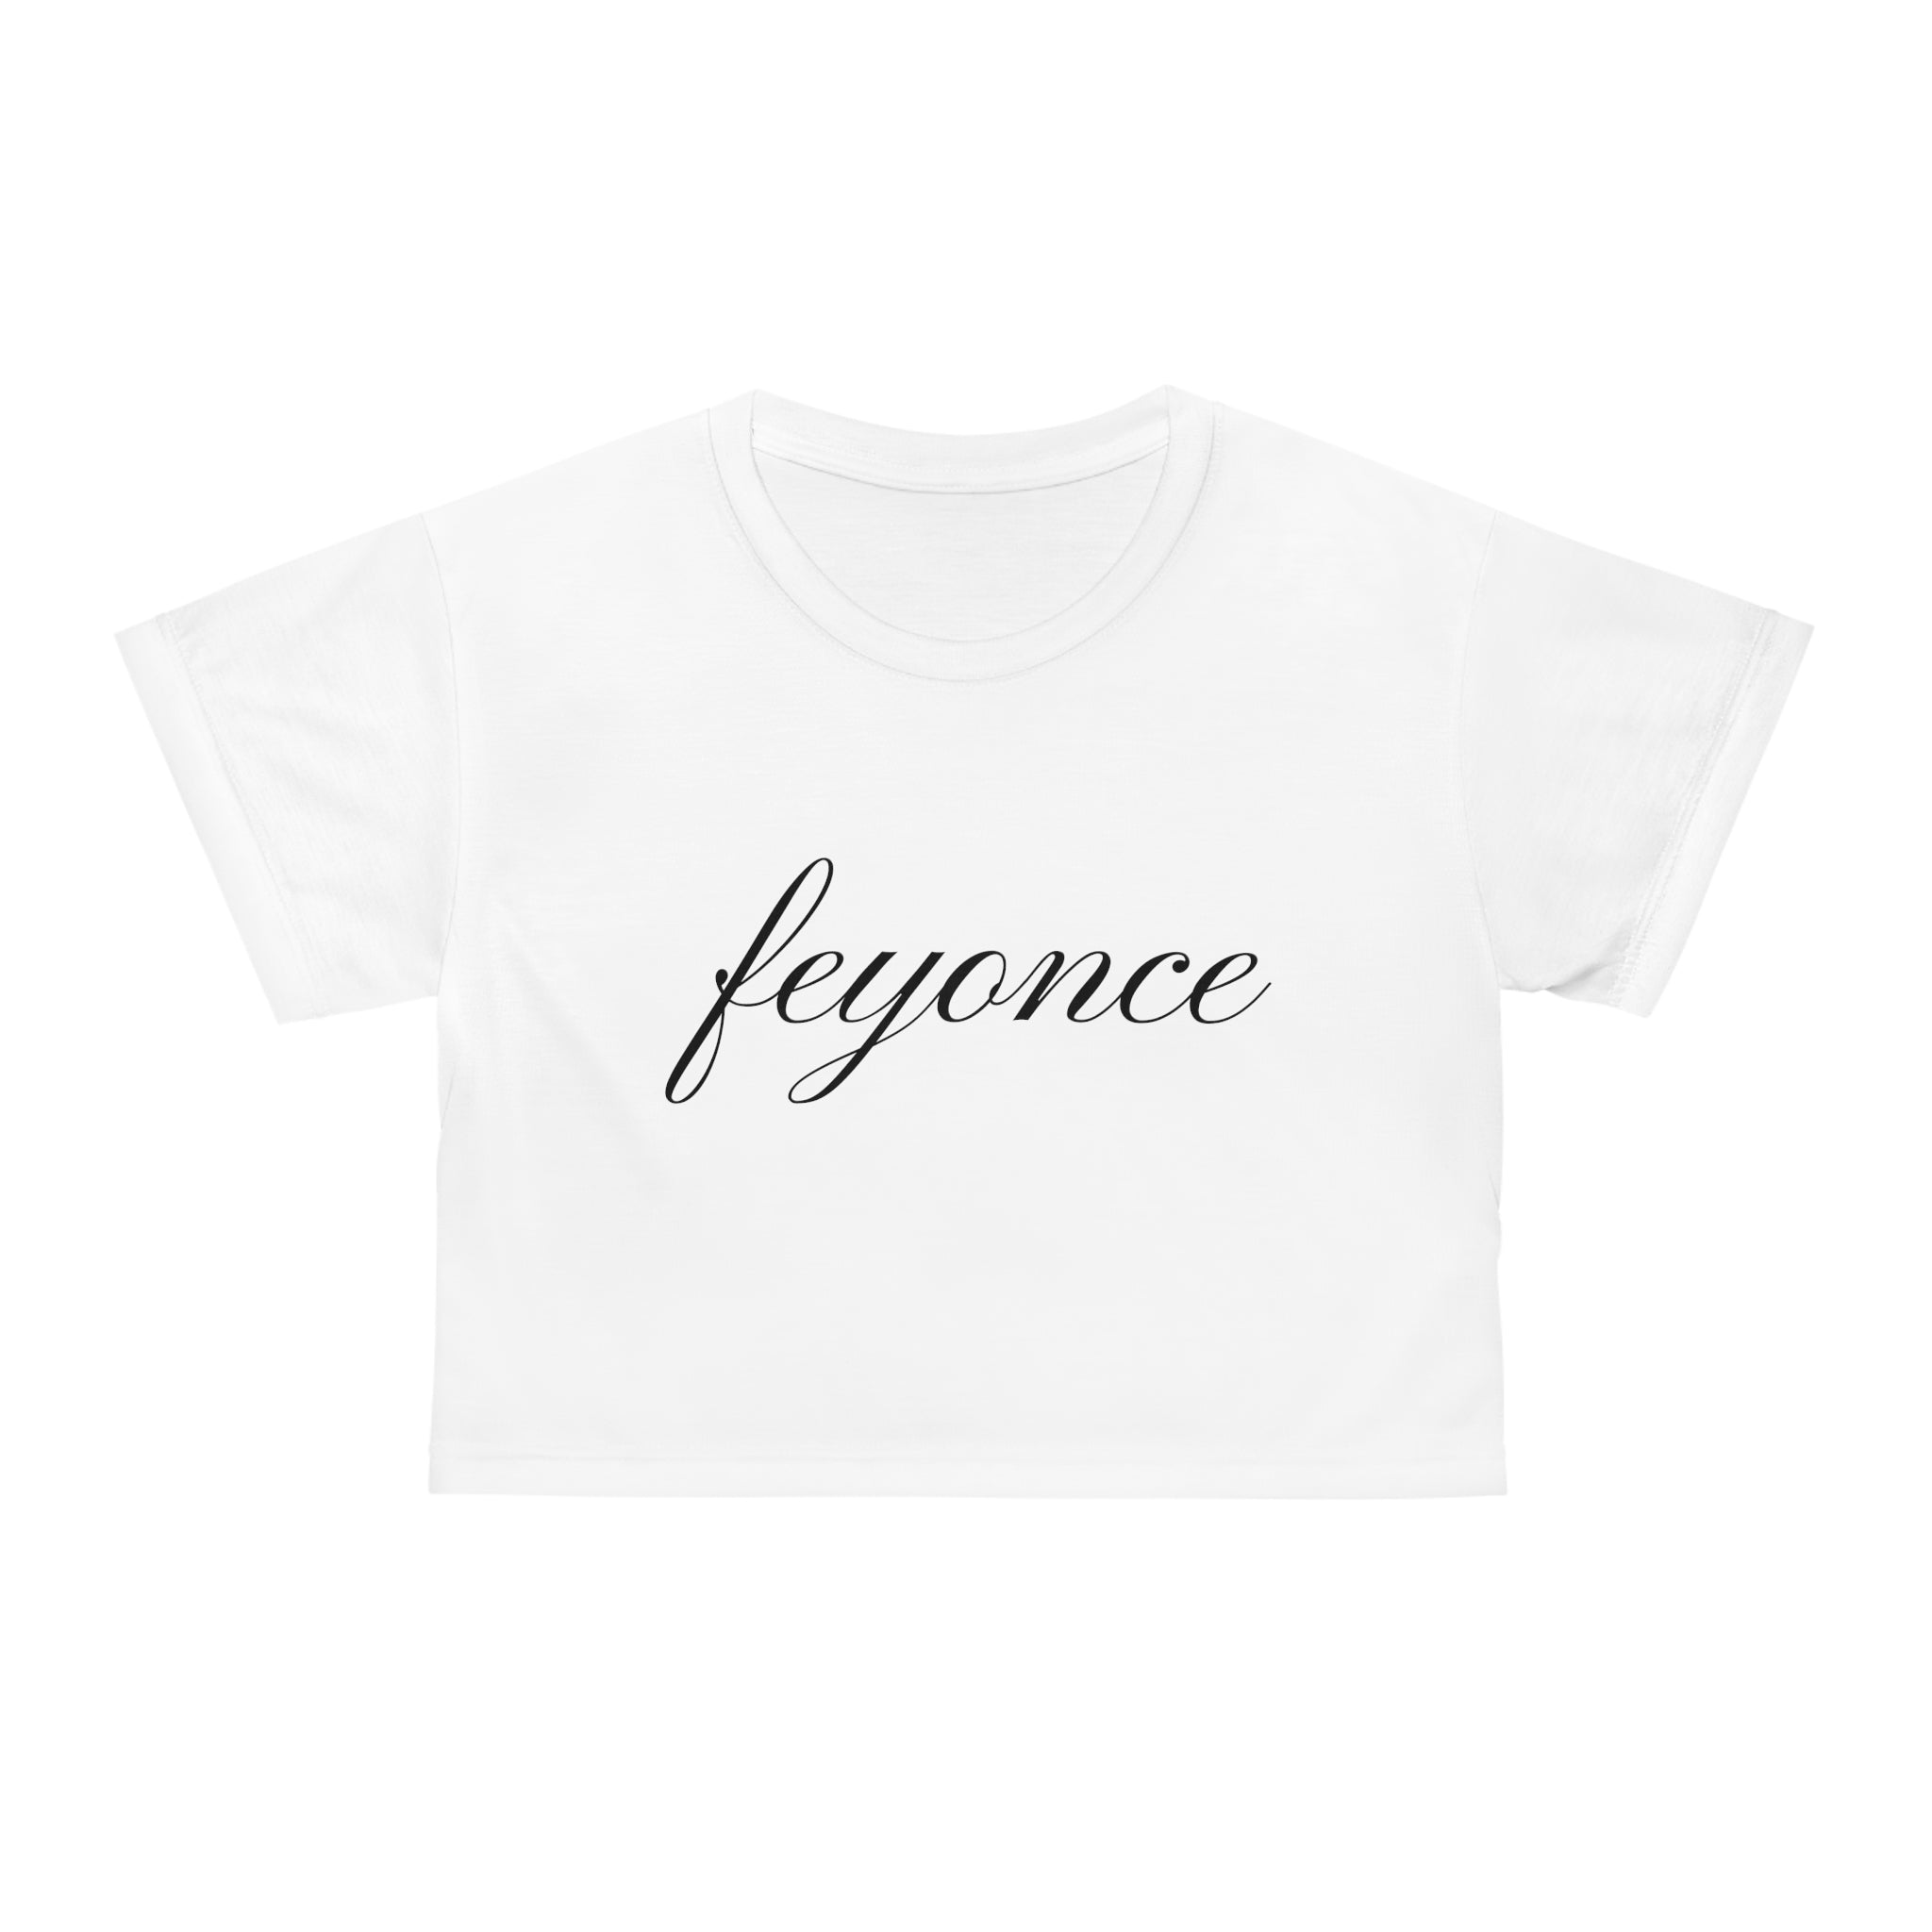 Feyonce Cropped Tee